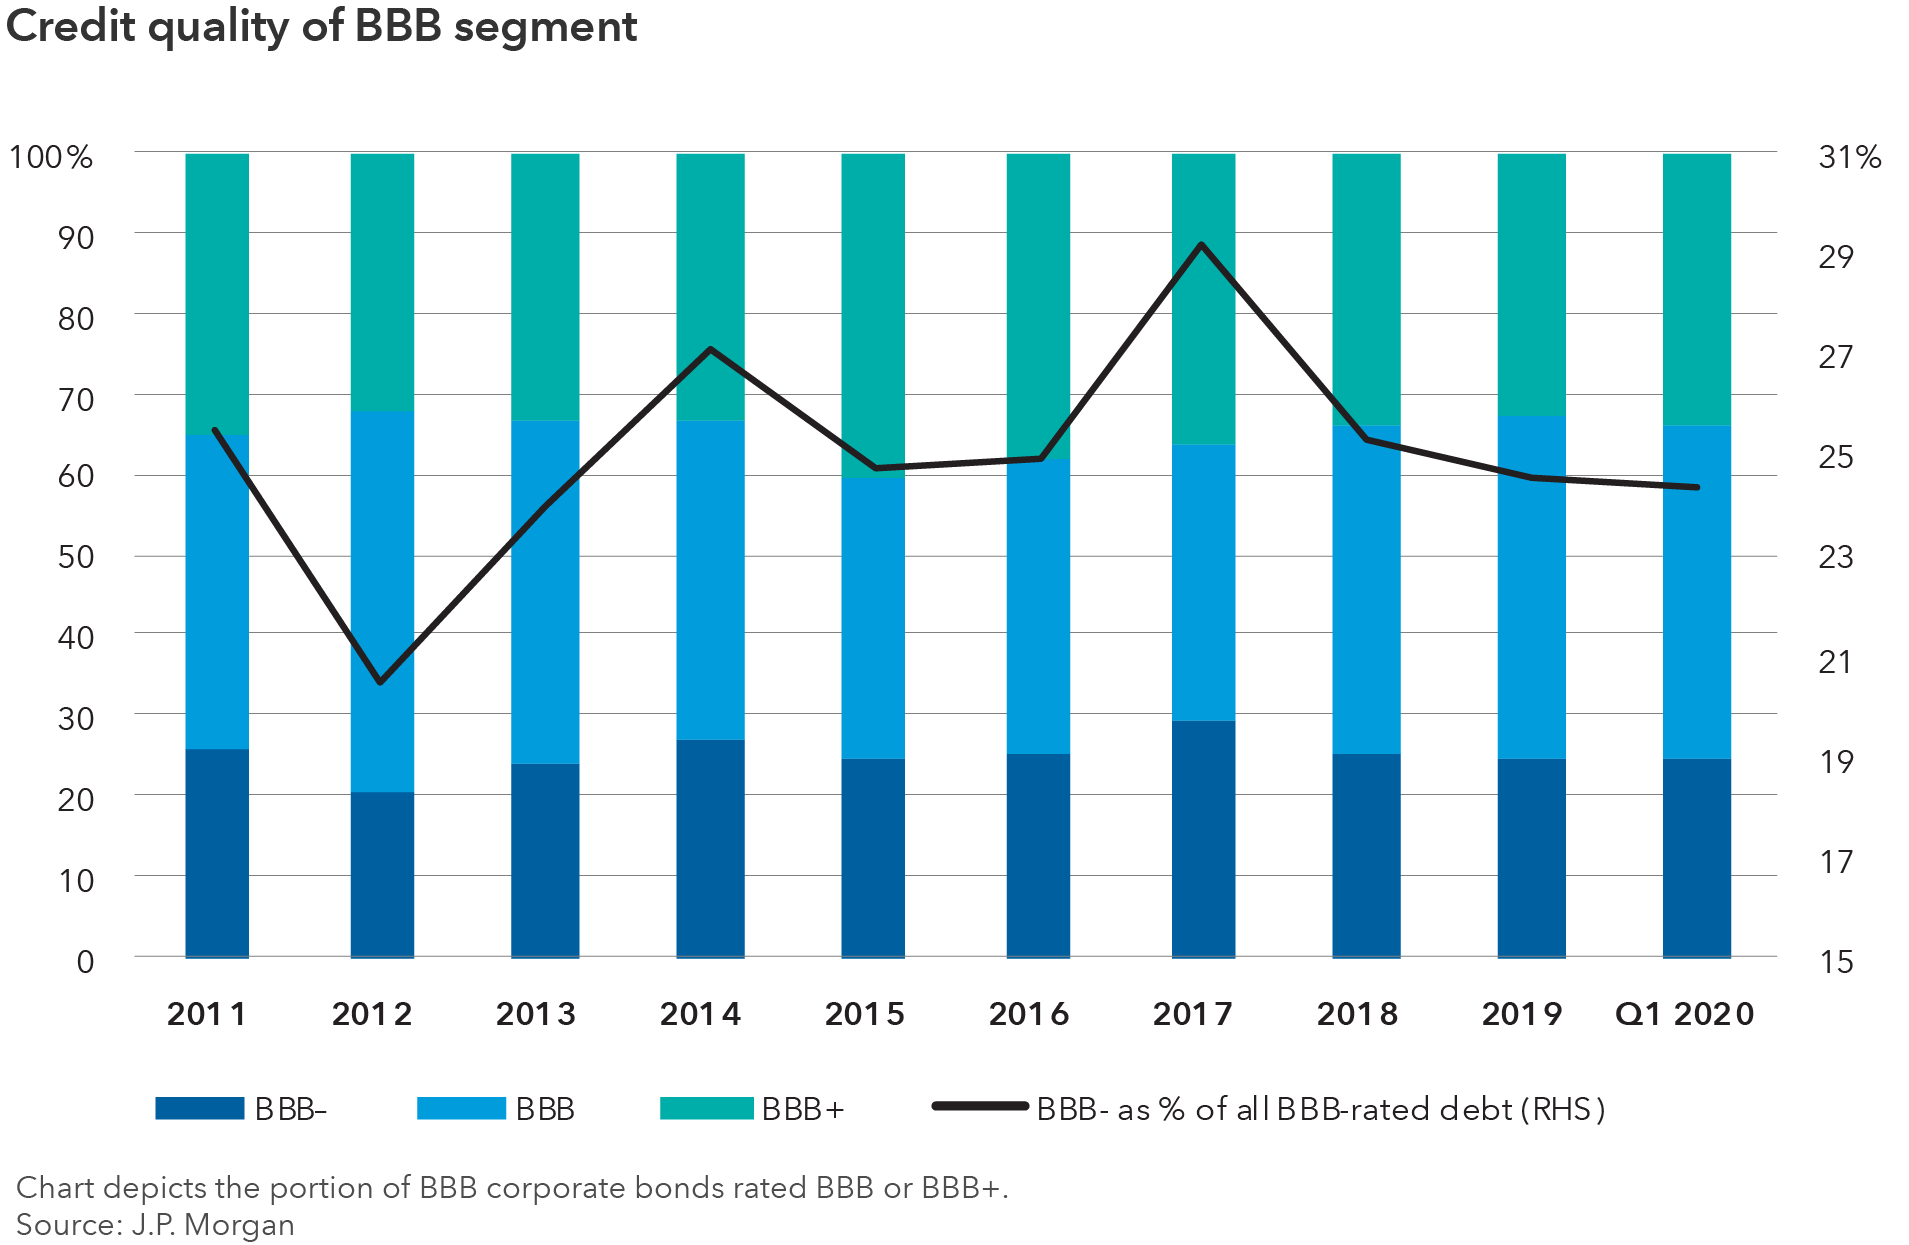 The chart depicts the credit quality of the BBB segment of the investment-grade nonfinancial corporate bond market from 2011 through the first quarter of 2020. Investment-grade bonds are those rated triple-B and above by rating agencies such as Moody's, Standard and Poor's and Fitch. For each year, it shows a breakdown between bonds rated BBB-minus, BBB and BBB-plus. It also depicts bonds rated BBB-minus as a percentage of all BBB-rated debt. In 2011, bonds rated BBB-minus represented 25.5% of the BBB segment, bonds rated BBB represented 39.1% and bonds rated BBB-plus represented 35.4%. In 2012, the breakdown was BBB-minus 20.5%, BBB 47.0% and BBB-plus 32.5%. In 2013, the breakdown was BBB-minus 24.0%, BBB 42.5% and BBB-plus 33.5%. In 2014, the breakdown was BBB-minus 27.0%, BBB 39.3% and BBB-plus 33.6%. In 2015, the breakdown was BBB-minus 24.7%, BBB 34.5% and BBB-plus 40.7%. In 2016, the breakdown was BBB-minus 24.9%, BBB 36.8% and BBB-plus 38.2%. In 2017, the breakdown was BBB-minus 29.1%, BBB 34.6% and BBB-plus 36.3%. In 2018, the breakdown was BBB-minus 25.2%, BBB 40.6% and BBB-plus 34.2%. In 2019, the breakdown was BBB-minus 24.5%, BBB 42.7% and BBB-plus 32.8%. In the first quarter of 2020, the breakdown was BBB-minus 24.3%, BBB 41.7% and BBB-plus 34.0%. Source: J.P. Morgan.